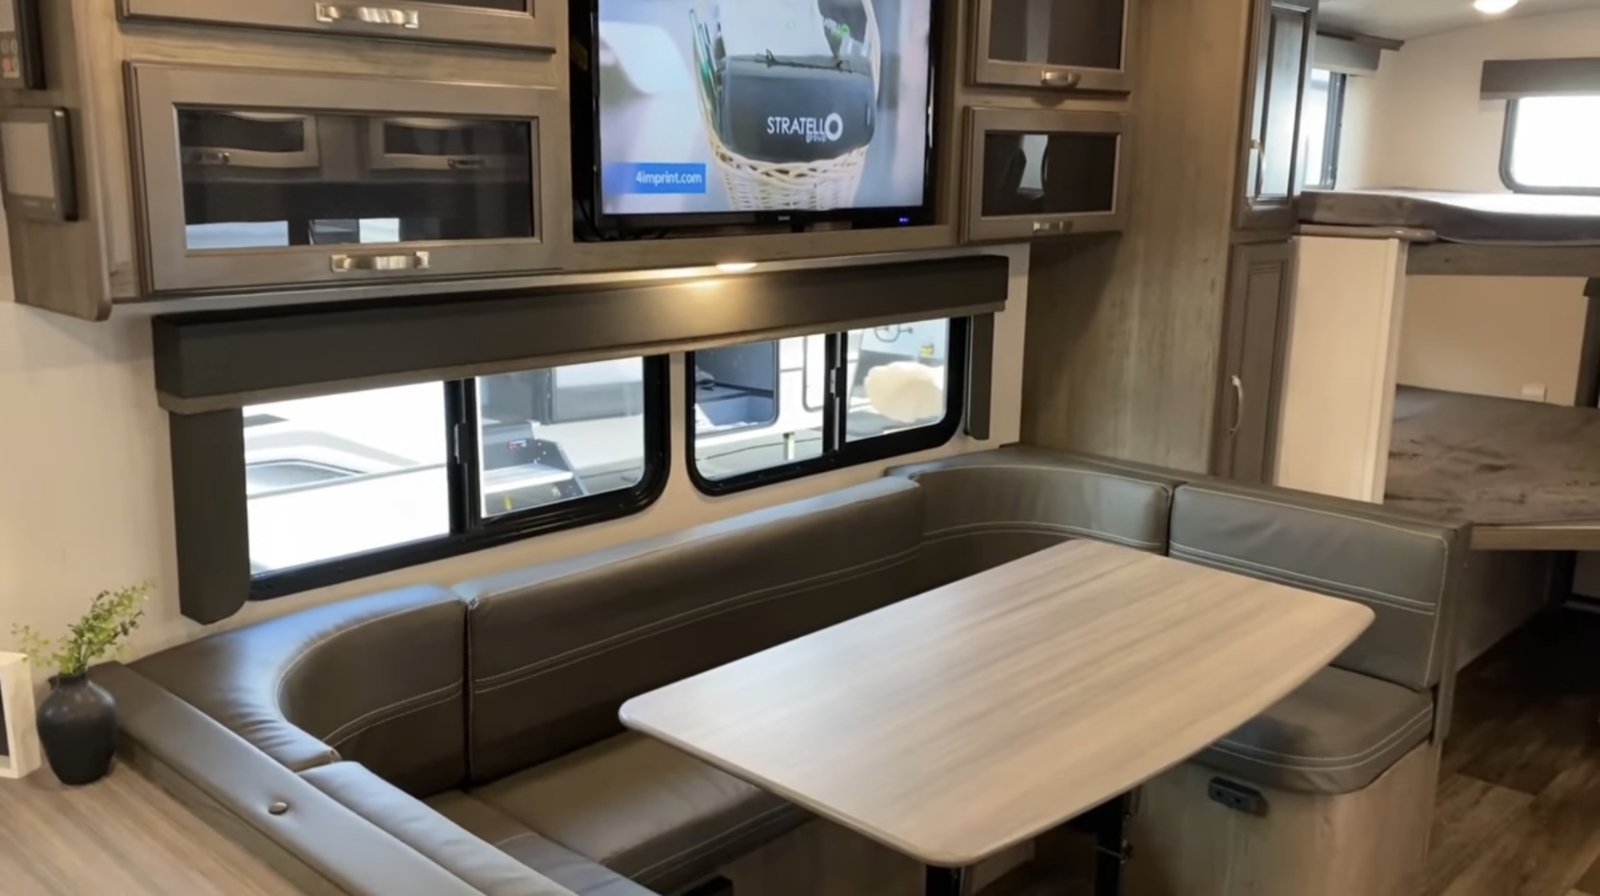 U-shaped dinette in the Cougar 27BHS